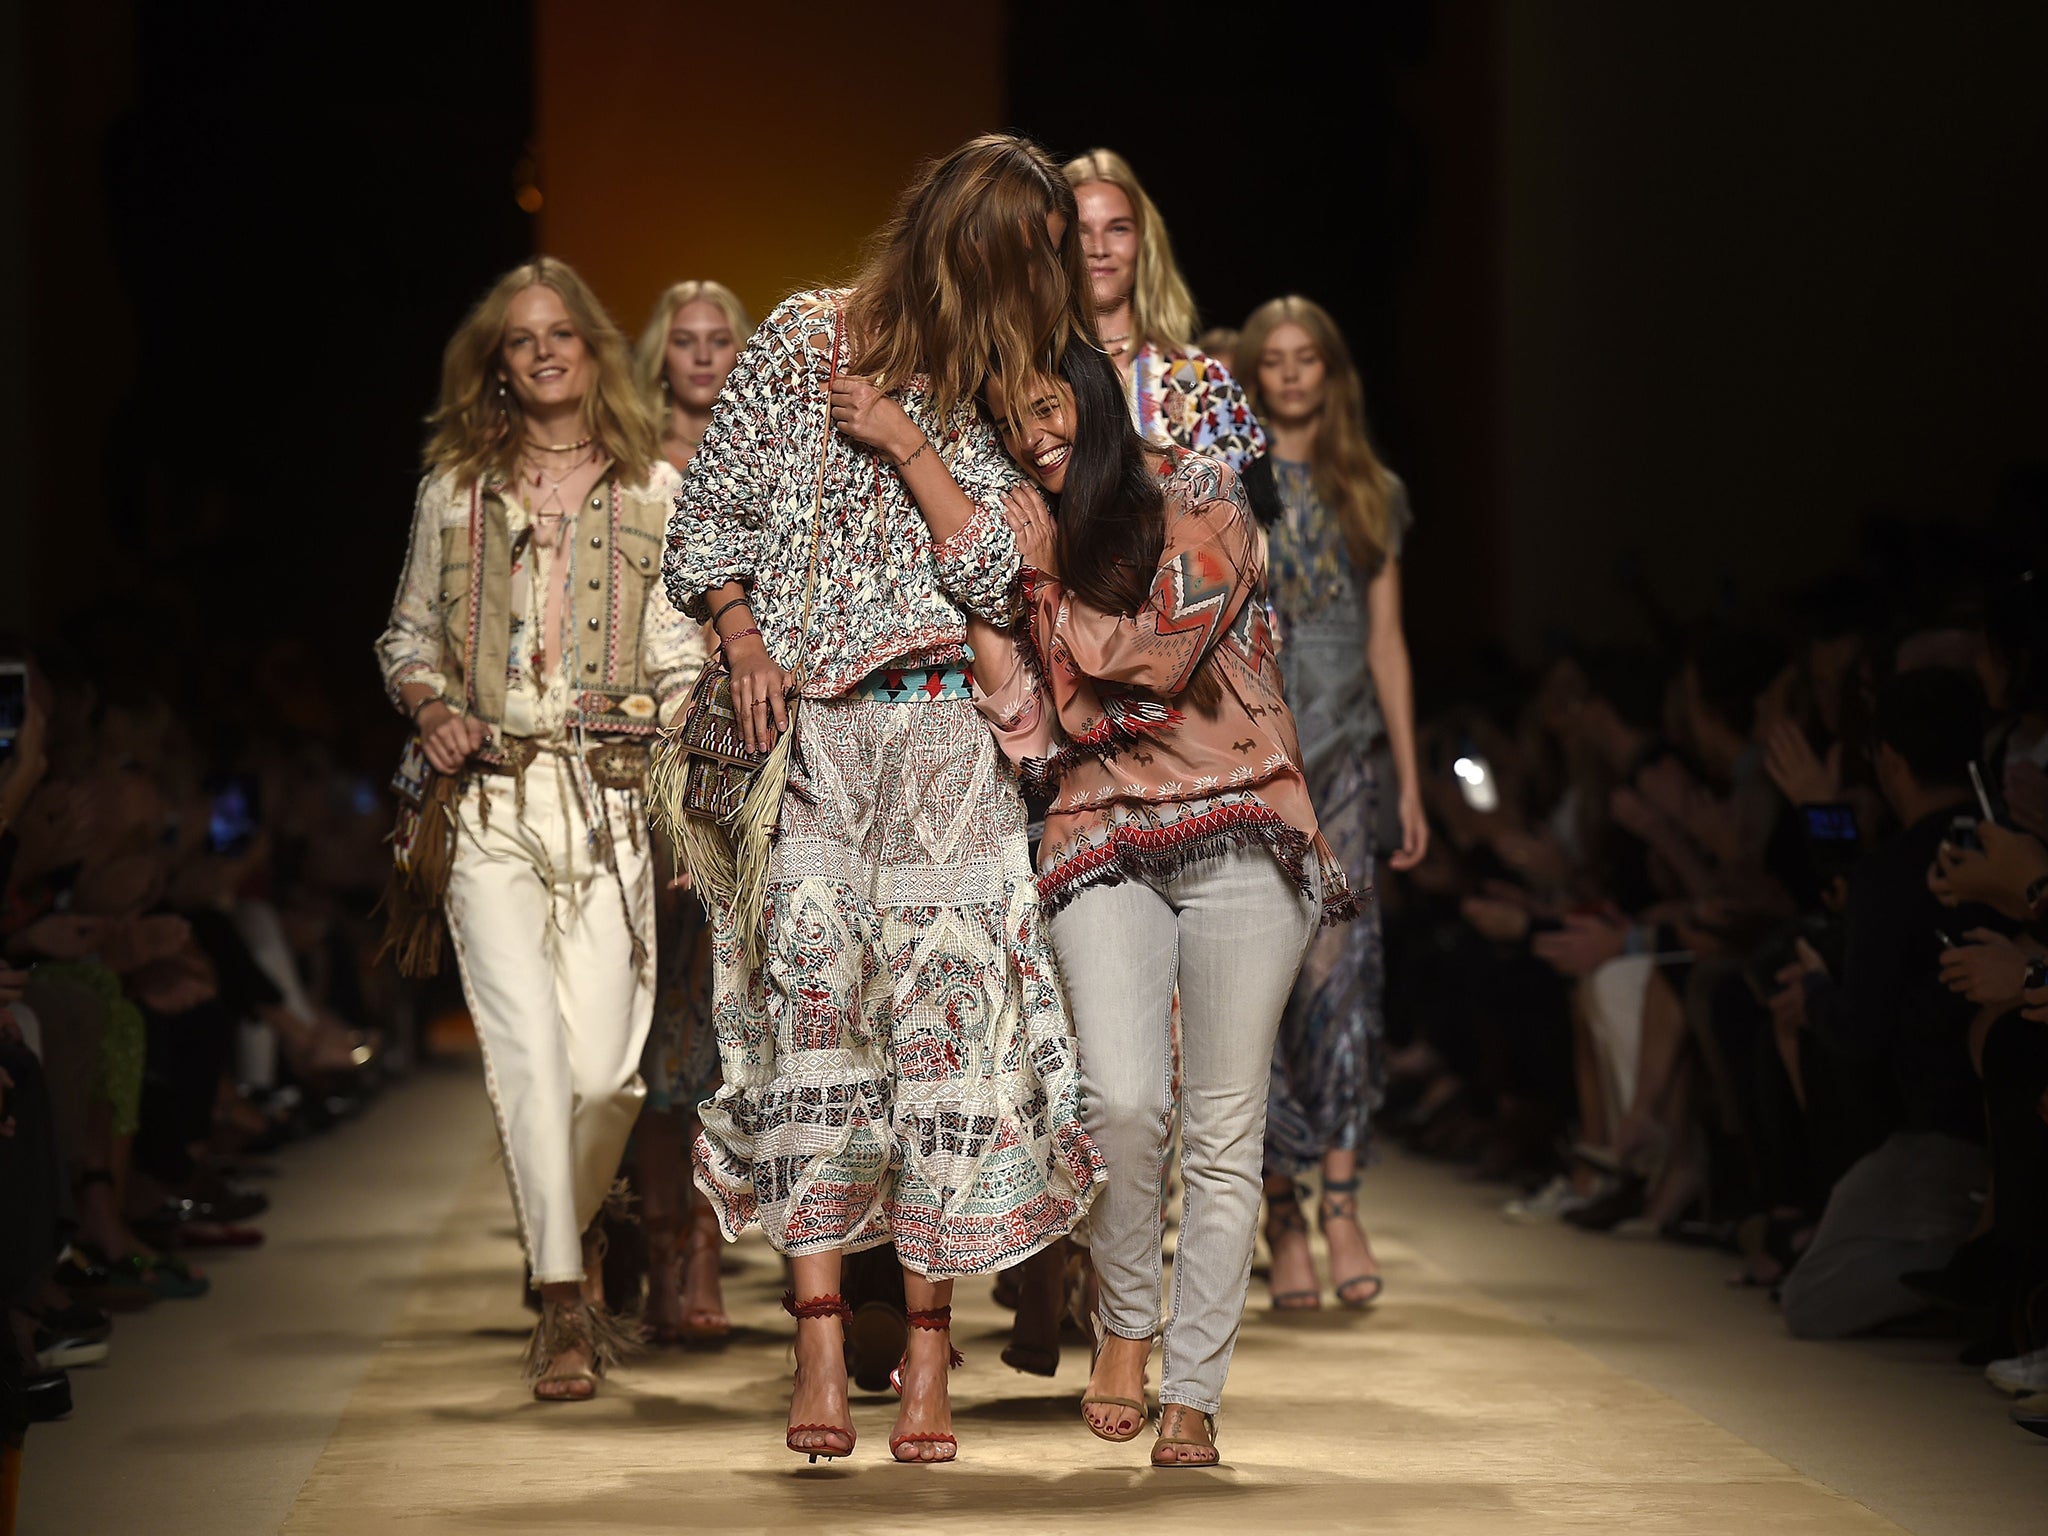 The designer Veronica Etro (right) and her models enjoy the closing moments of her show during the 2015 spring/summer collections at Milan Fashion Week